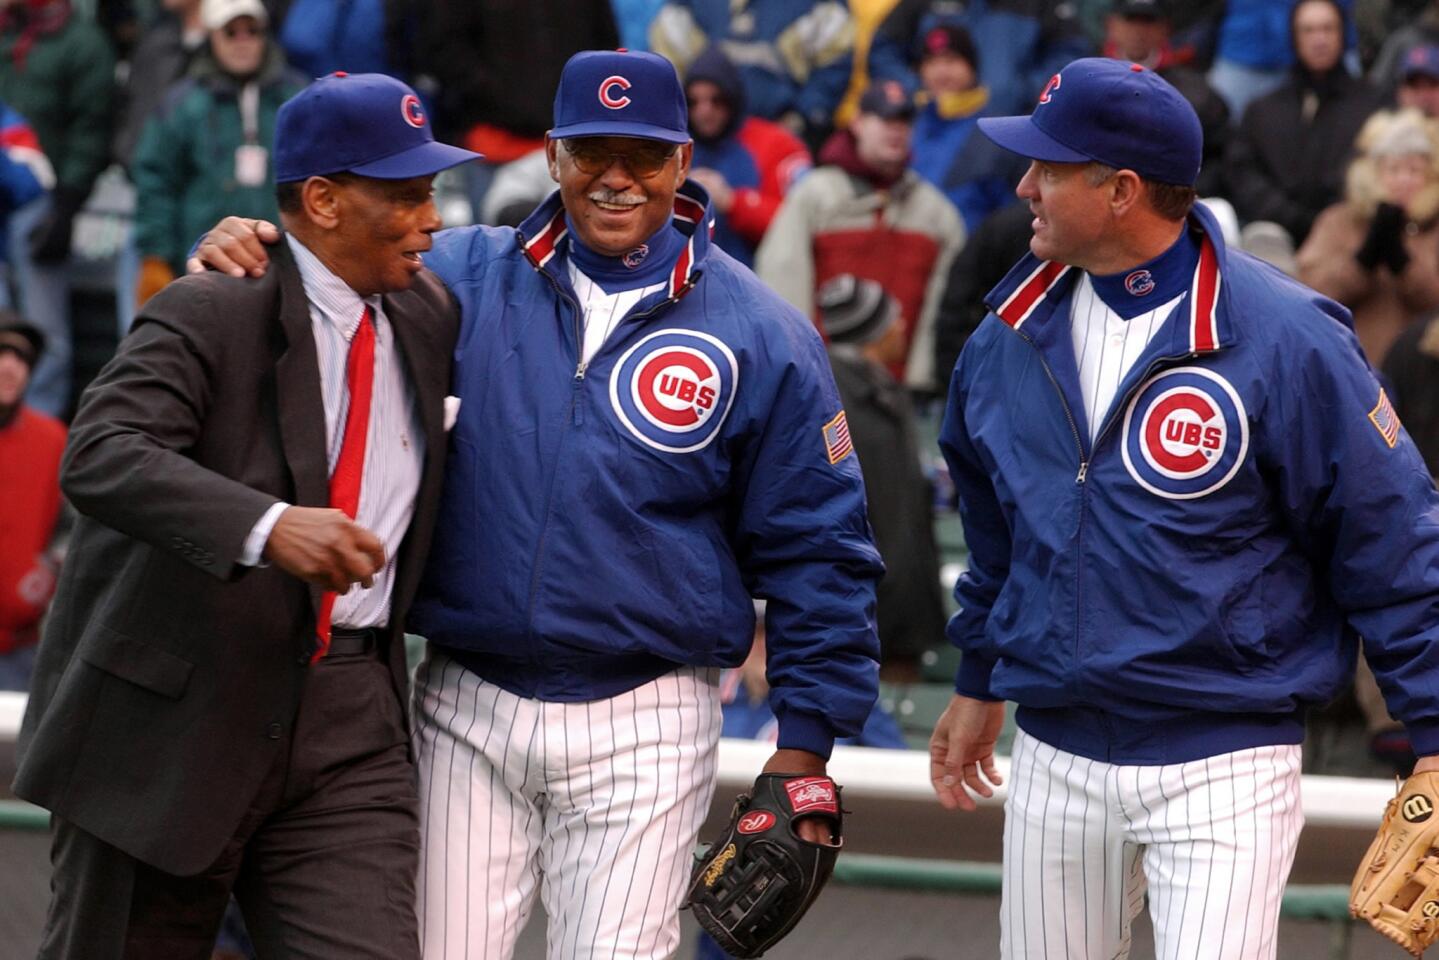 Ernie Banks, from left, Billy Williams and Ryne Sandberg on Opening Day 2003.